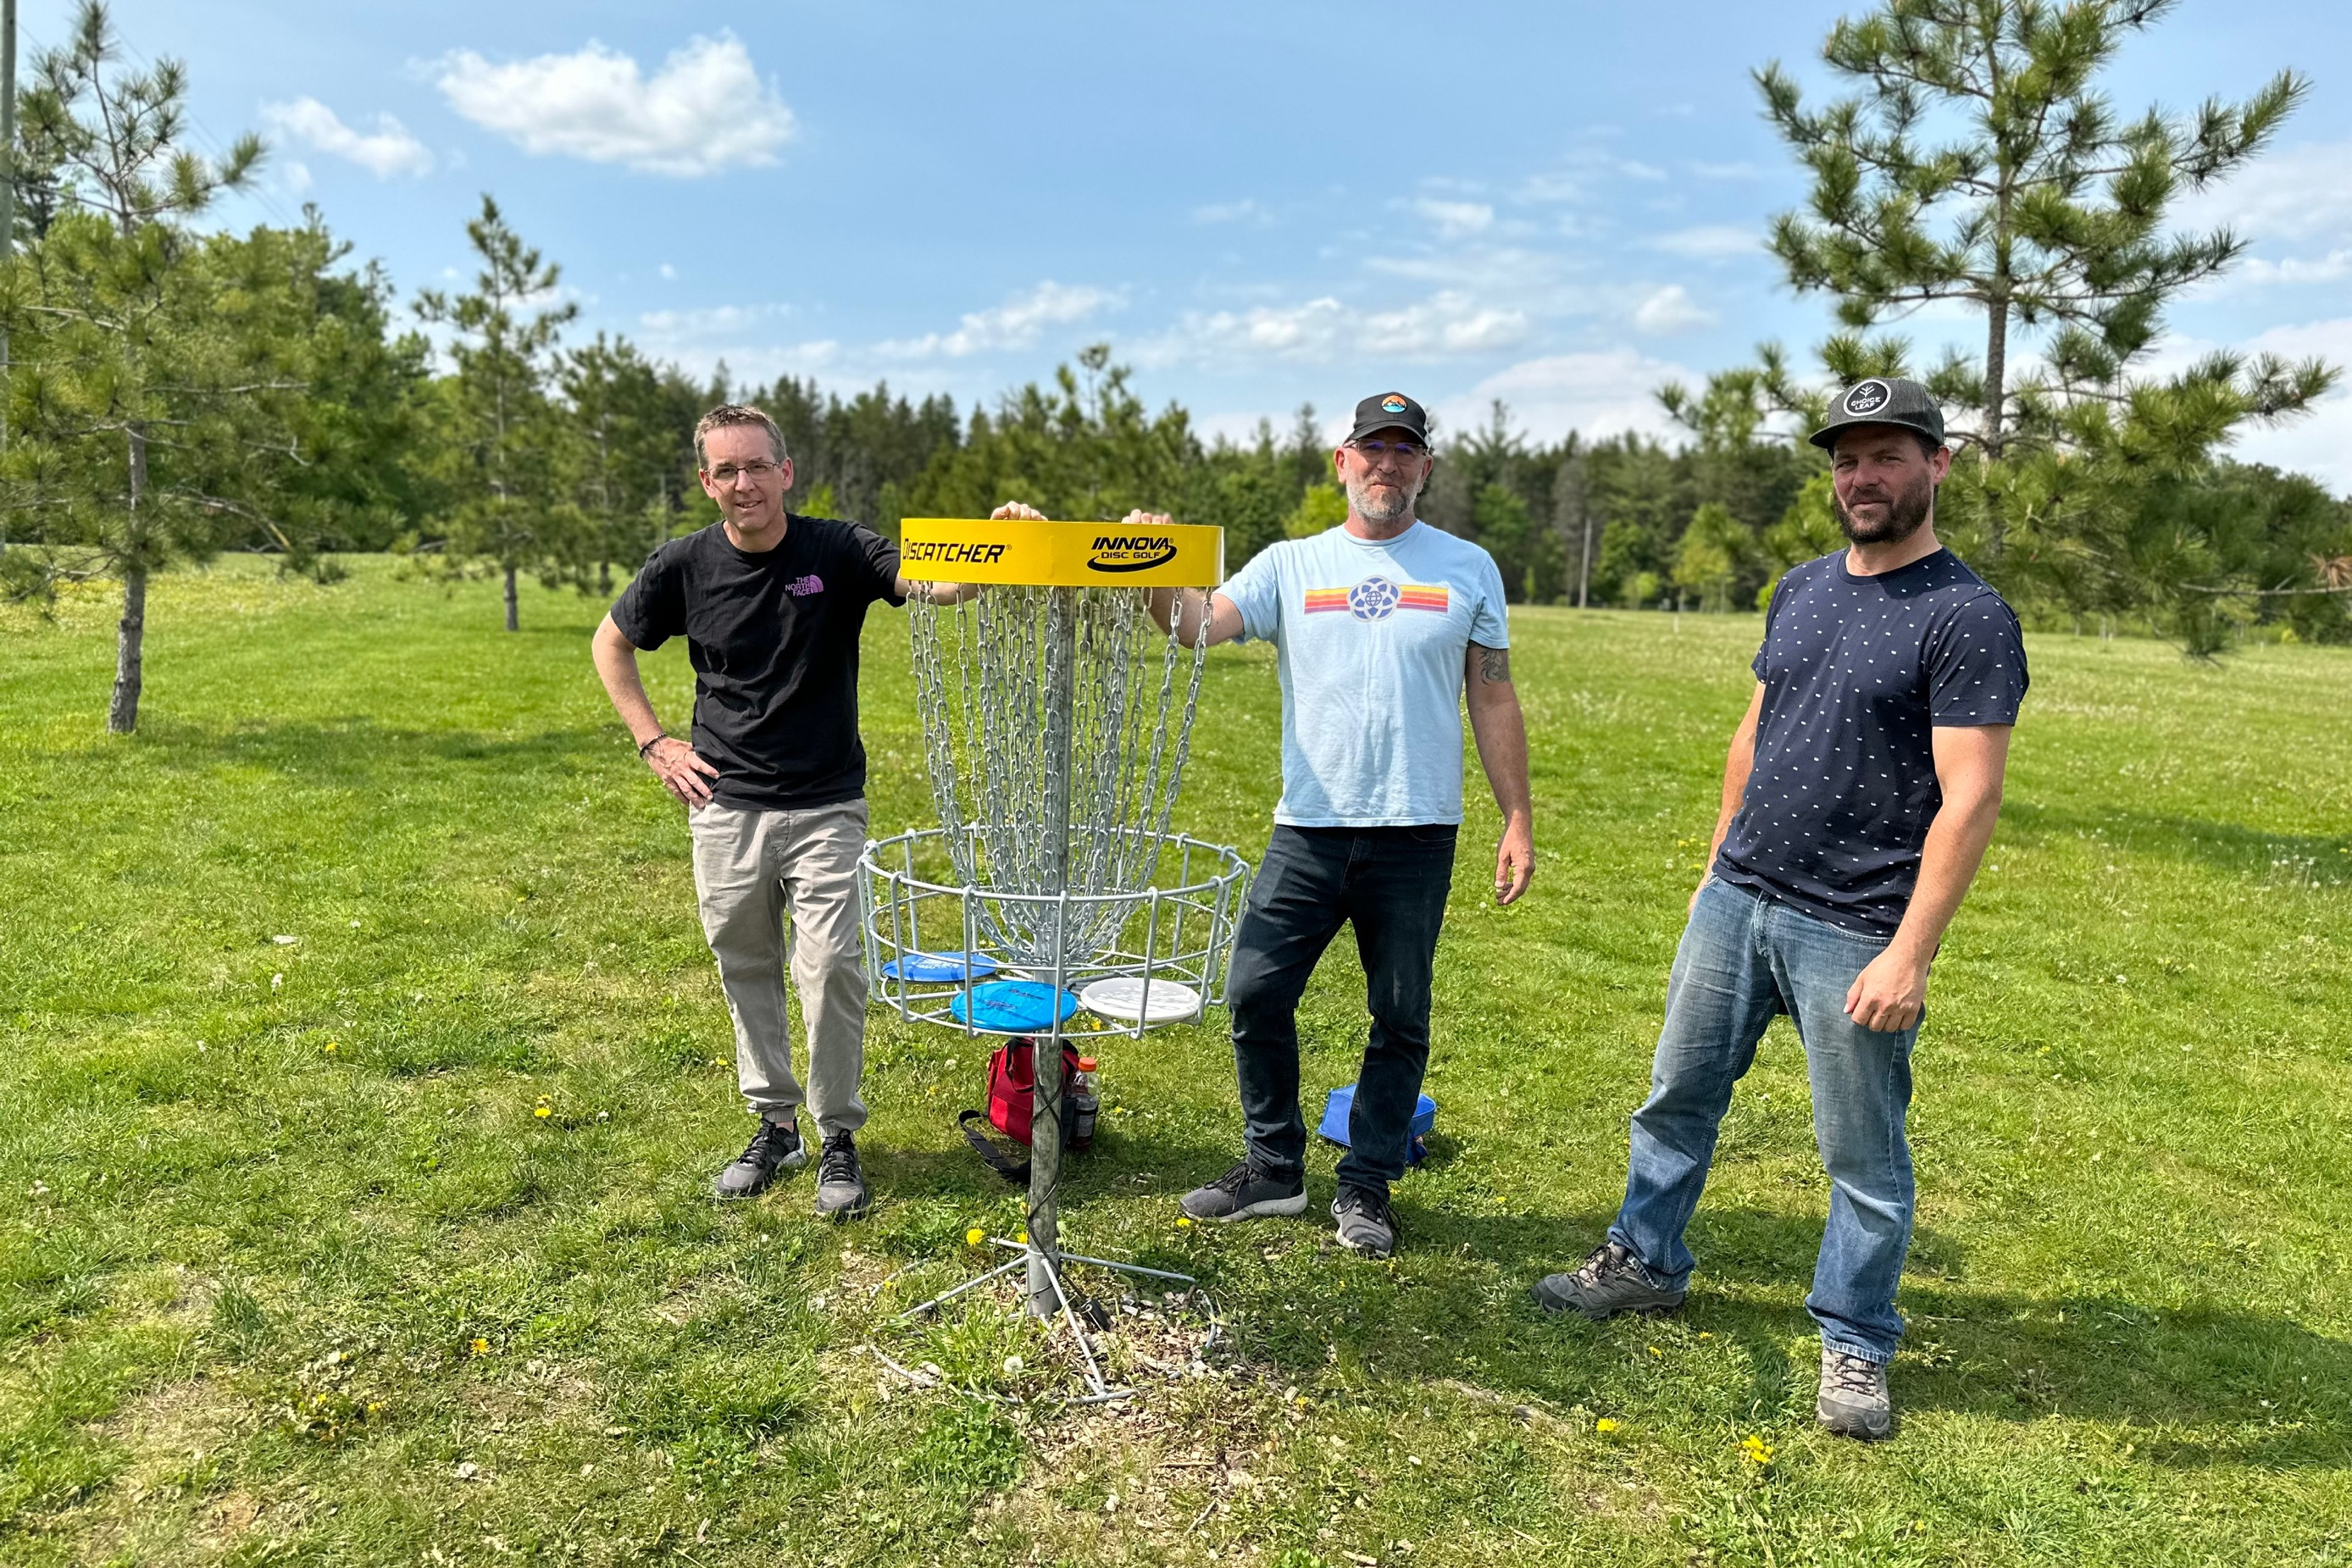 three men pose in front of a disc golf net